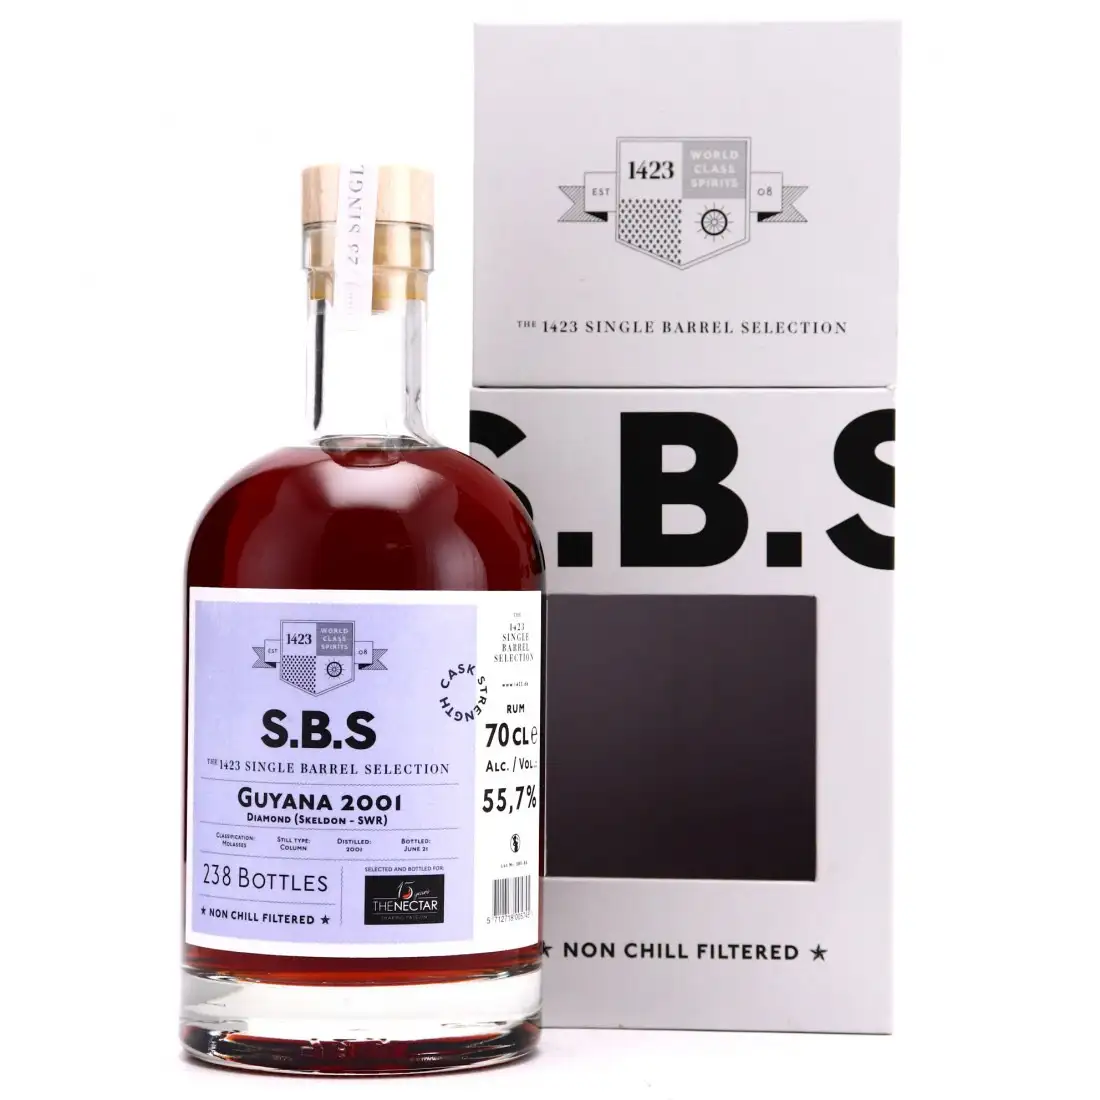 Image of the front of the bottle of the rum S.B.S Selected and bottled for The Nectar SWR